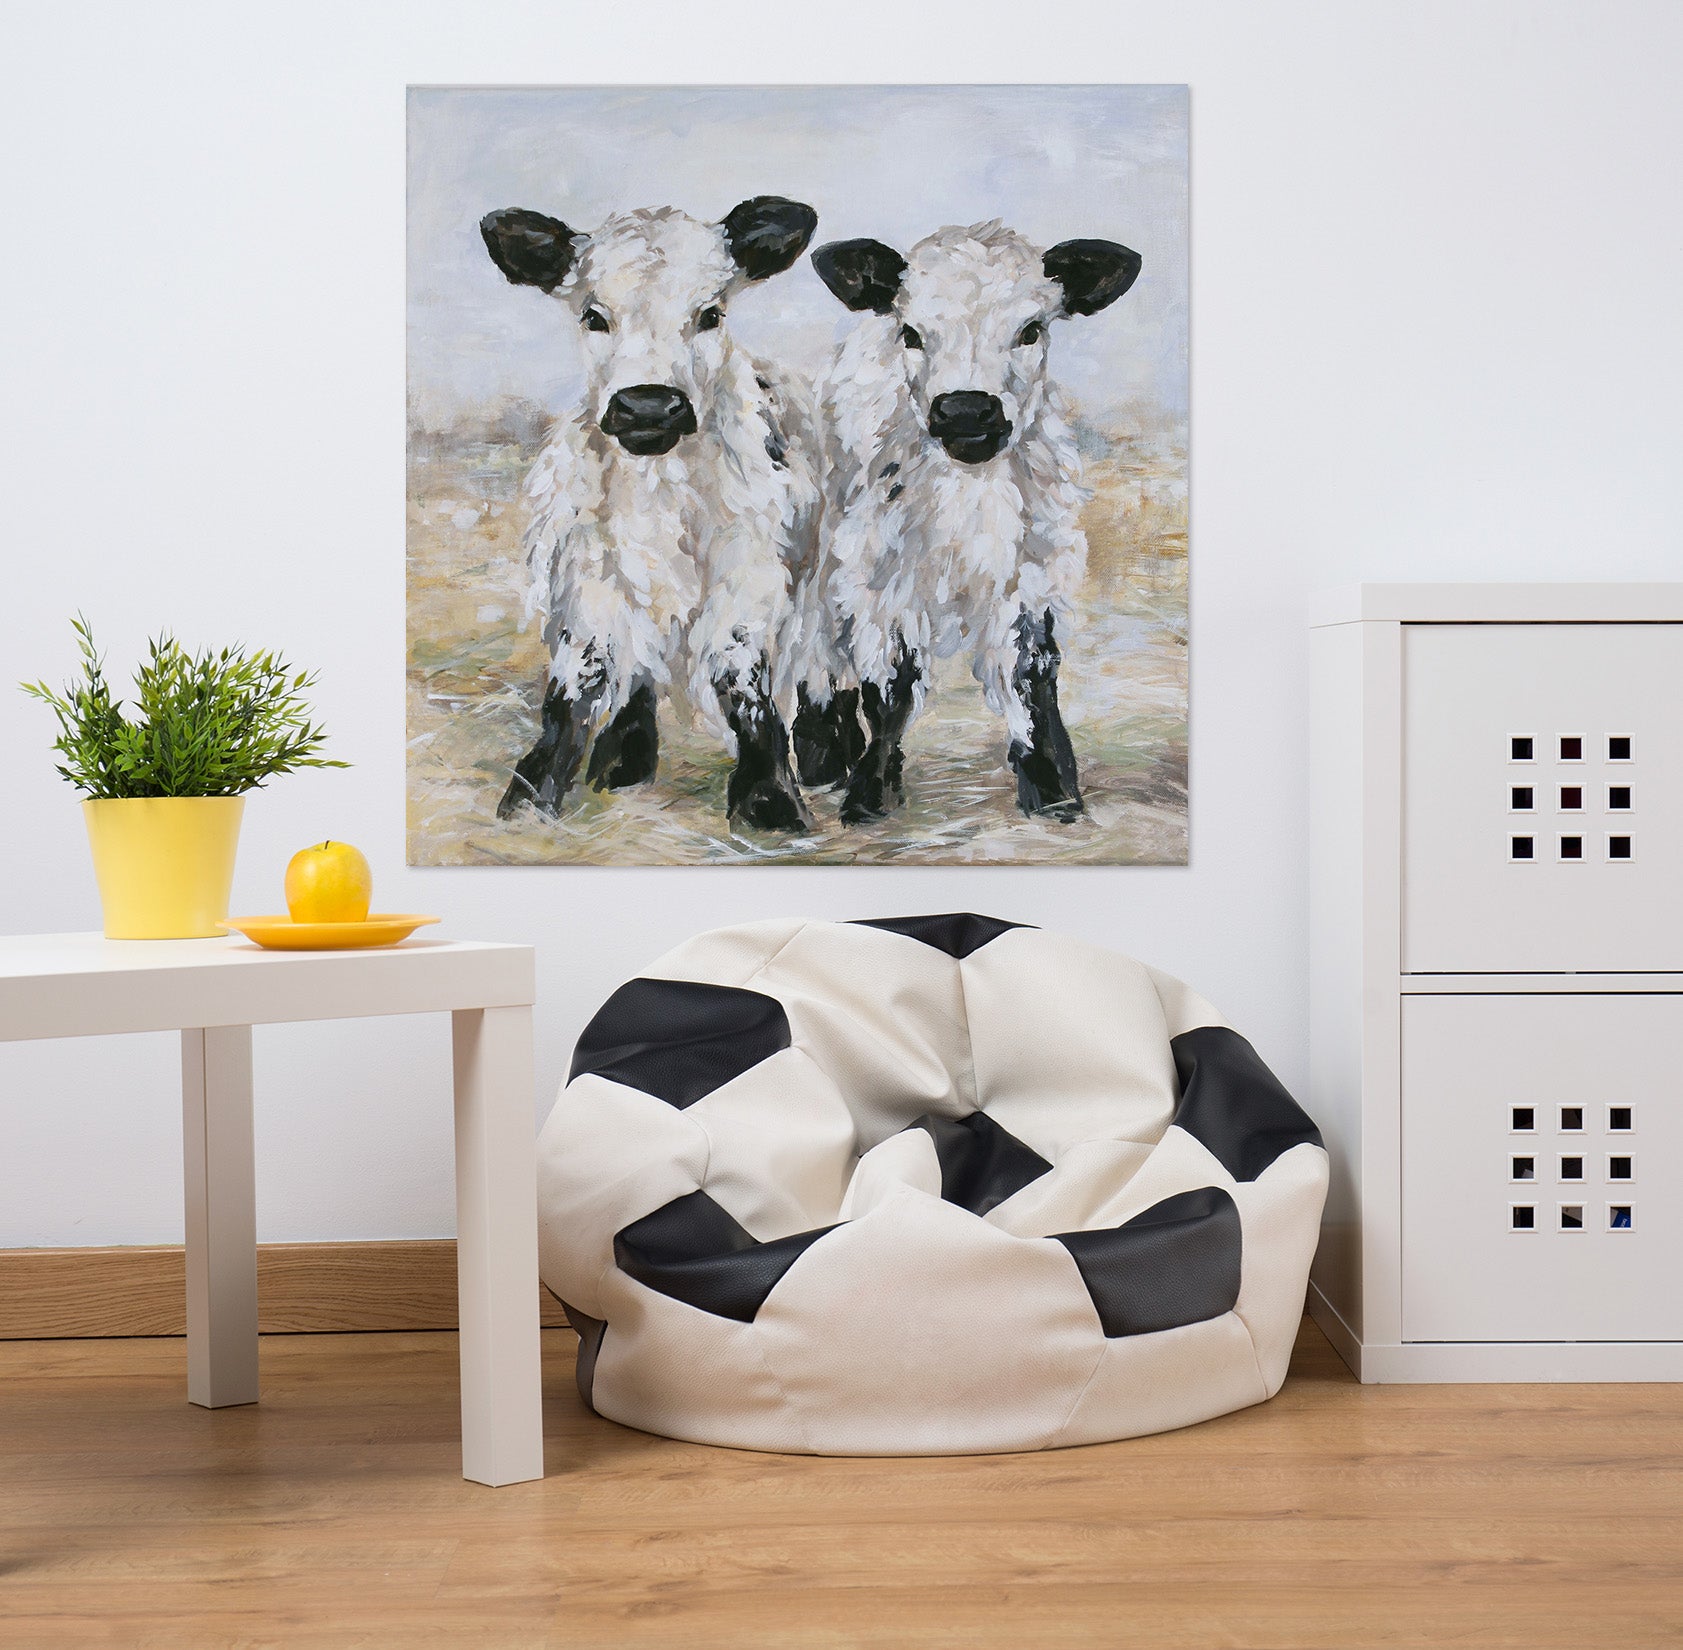 3D Small Cow 005 Debi Coules Wall Sticker